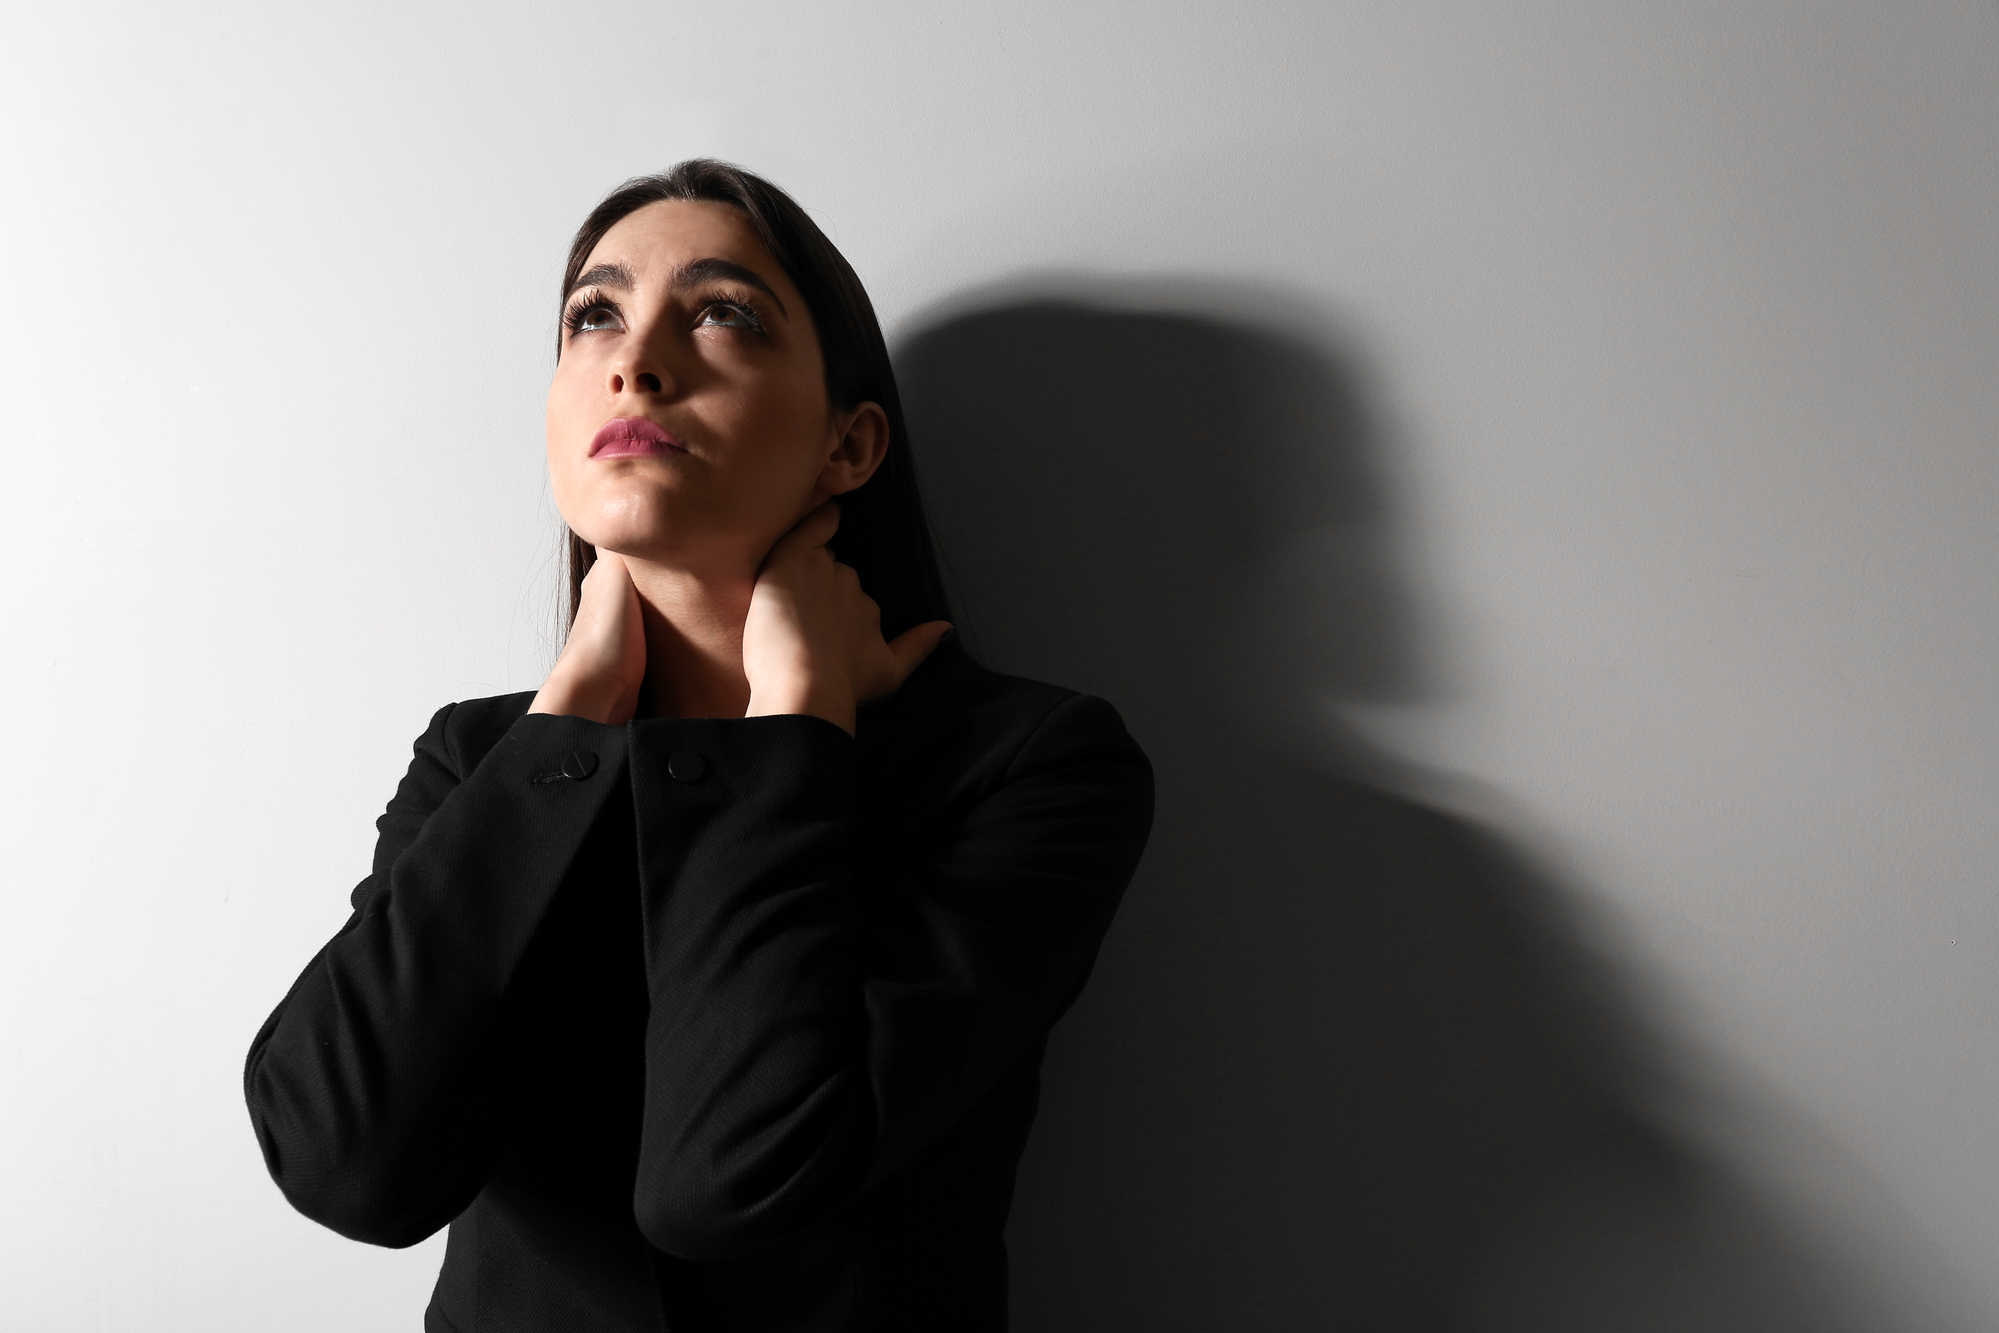 A woman with long dark hair and wearing a black outfit stands against a gray wall. She looks slightly upward with a contemplative expression, her hands gently touching her neck. The lighting creates a shadow of her on the wall.